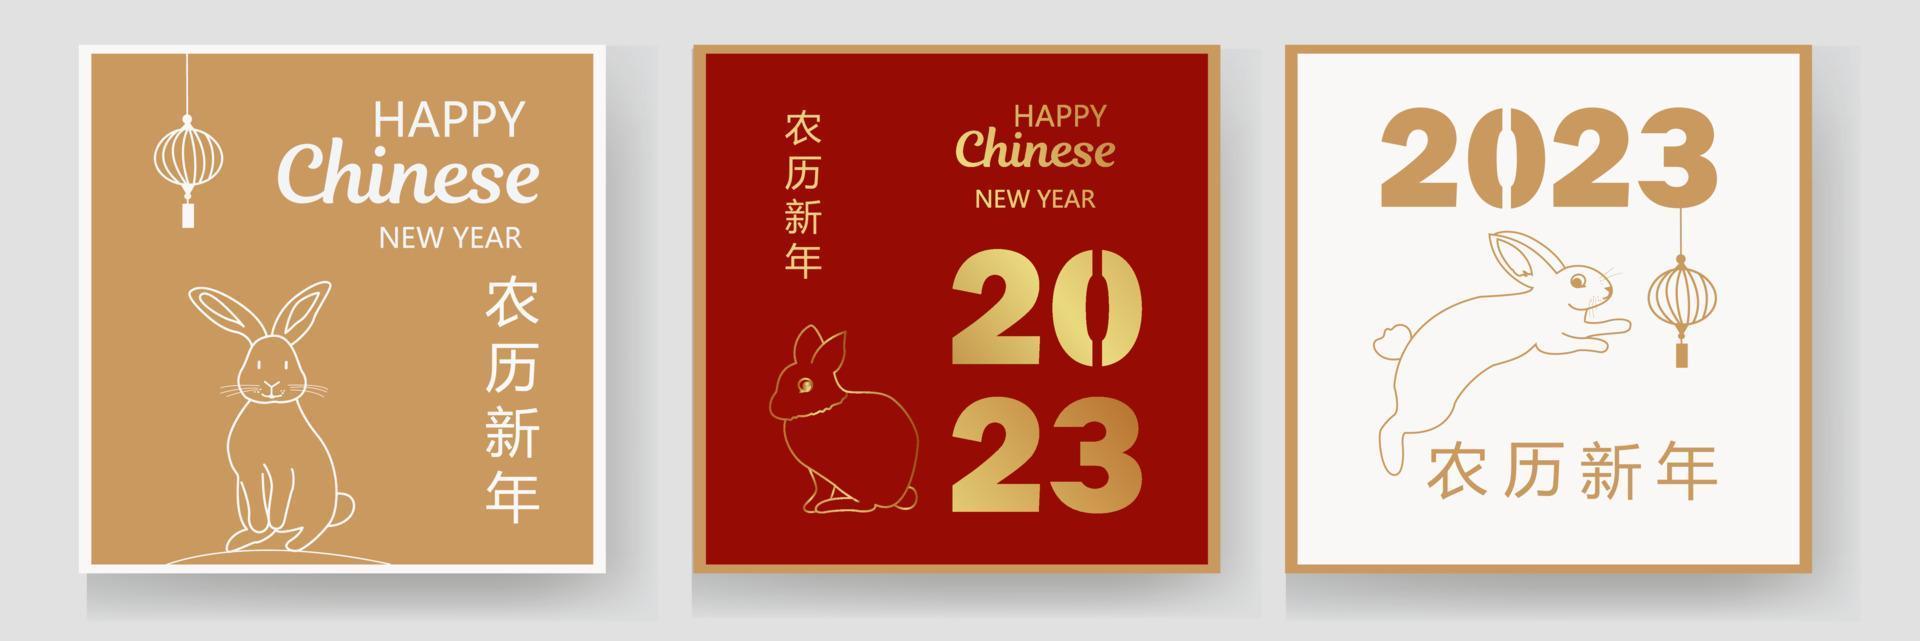 Set of square Chinese New Year vector backgrounds, banners, cards, posters. Oriental zodiac symbol of 2023. Chinese New Year 2023 Year of Rabbit